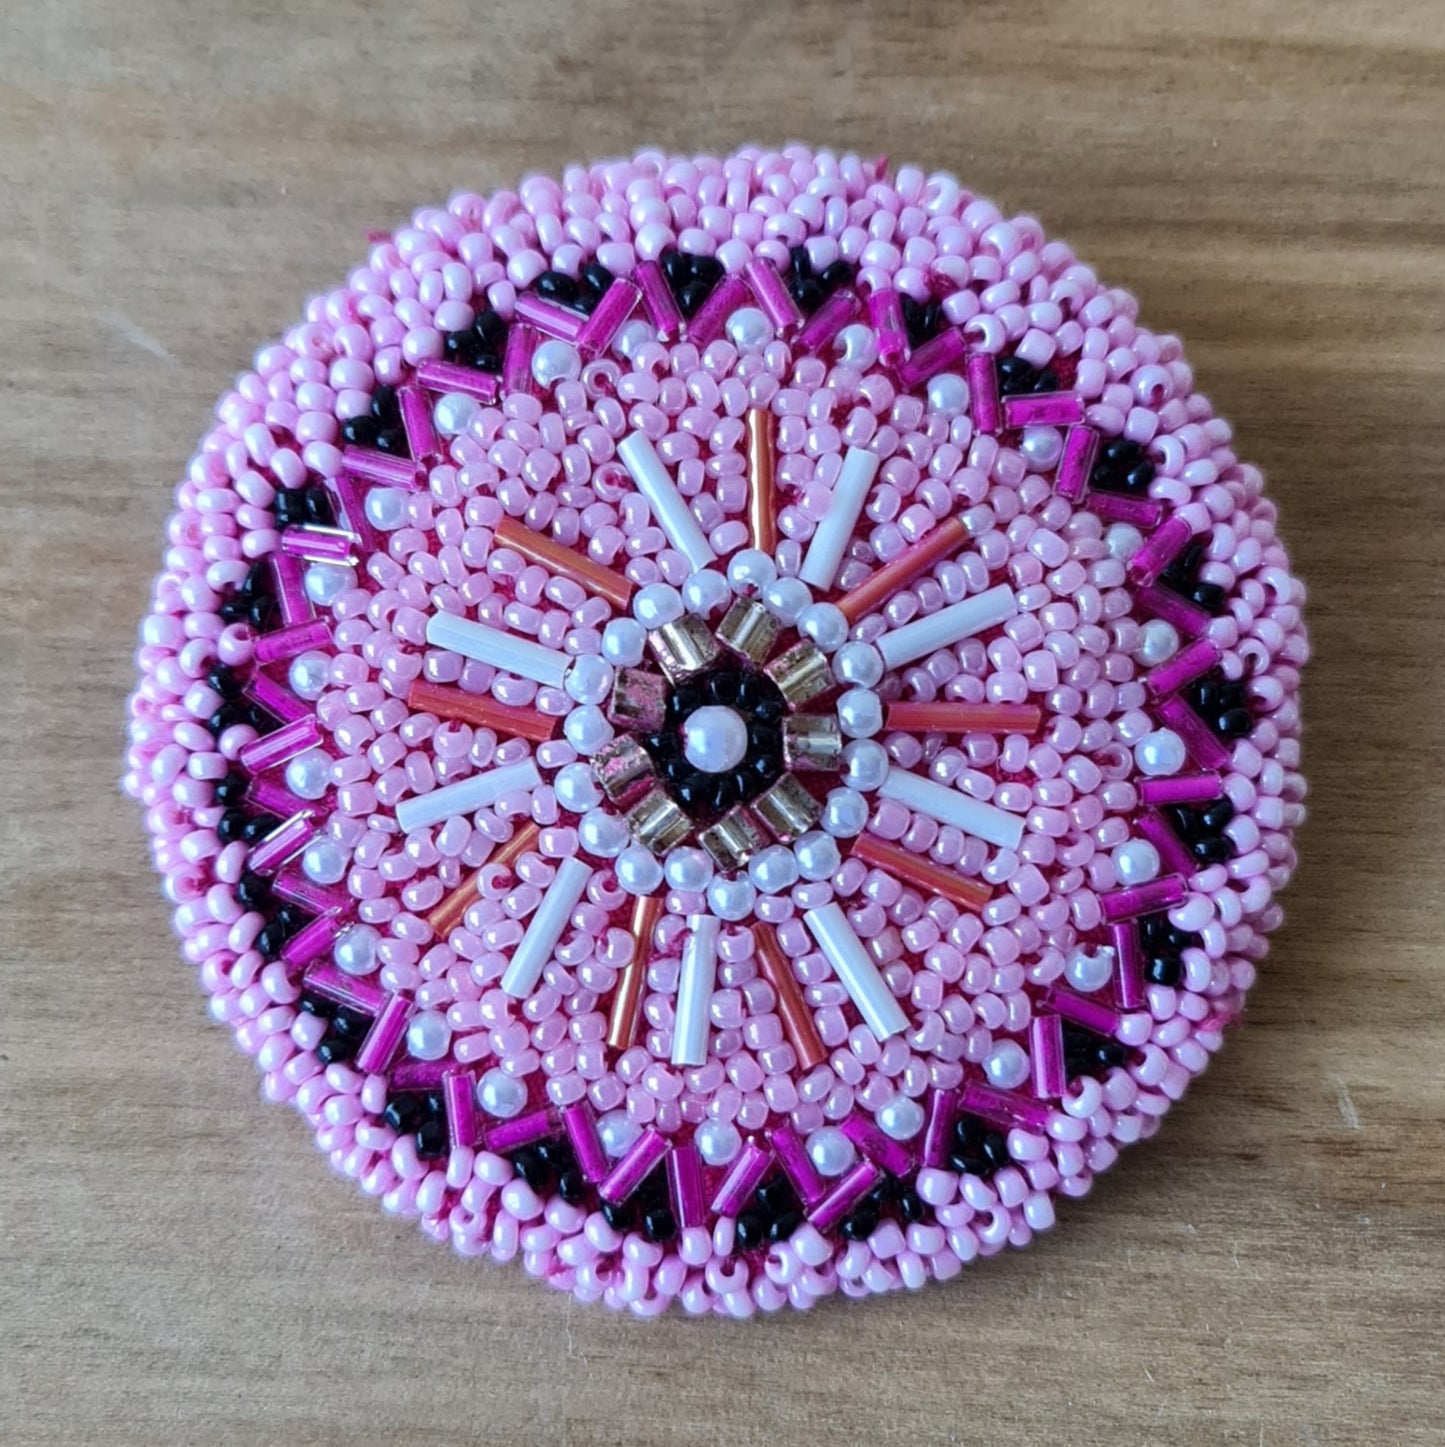 Beaded round brooch in various shades of pink with white and black accents / diameter 7 cm (AMA)